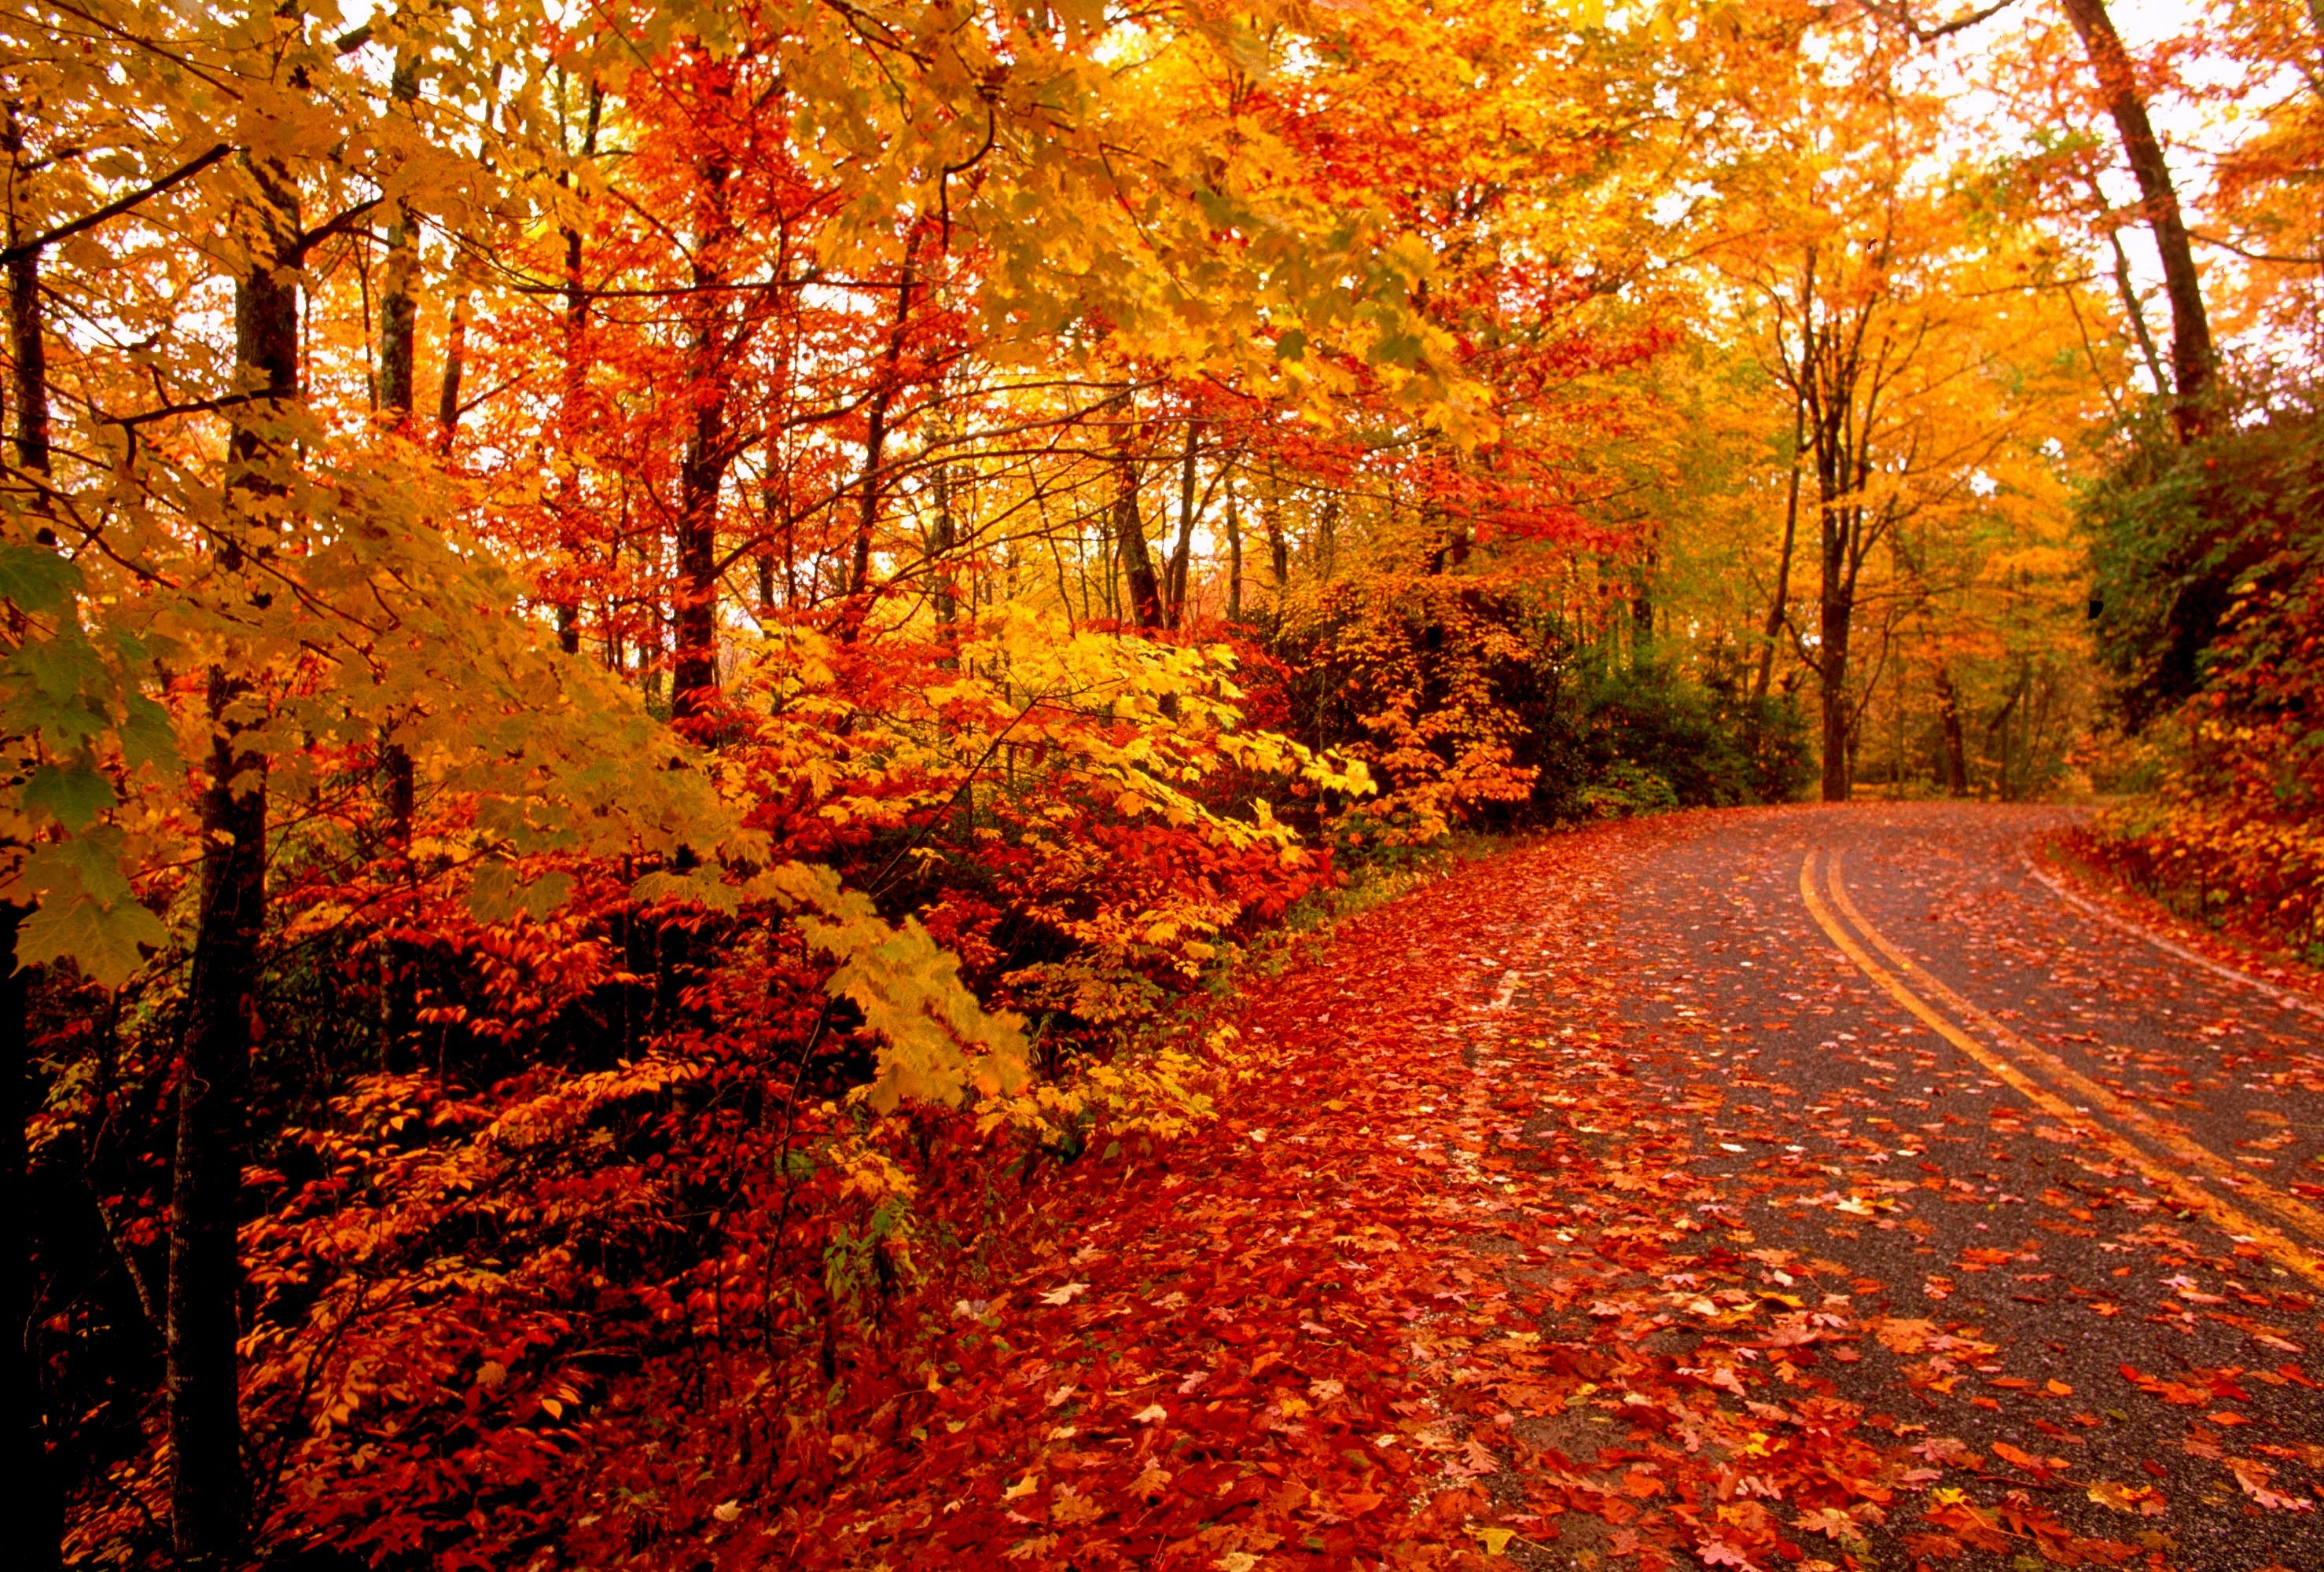 Misc: Fallen Leaves Autumn Orange Road Gold Red Trees Fall Wallpaper ...